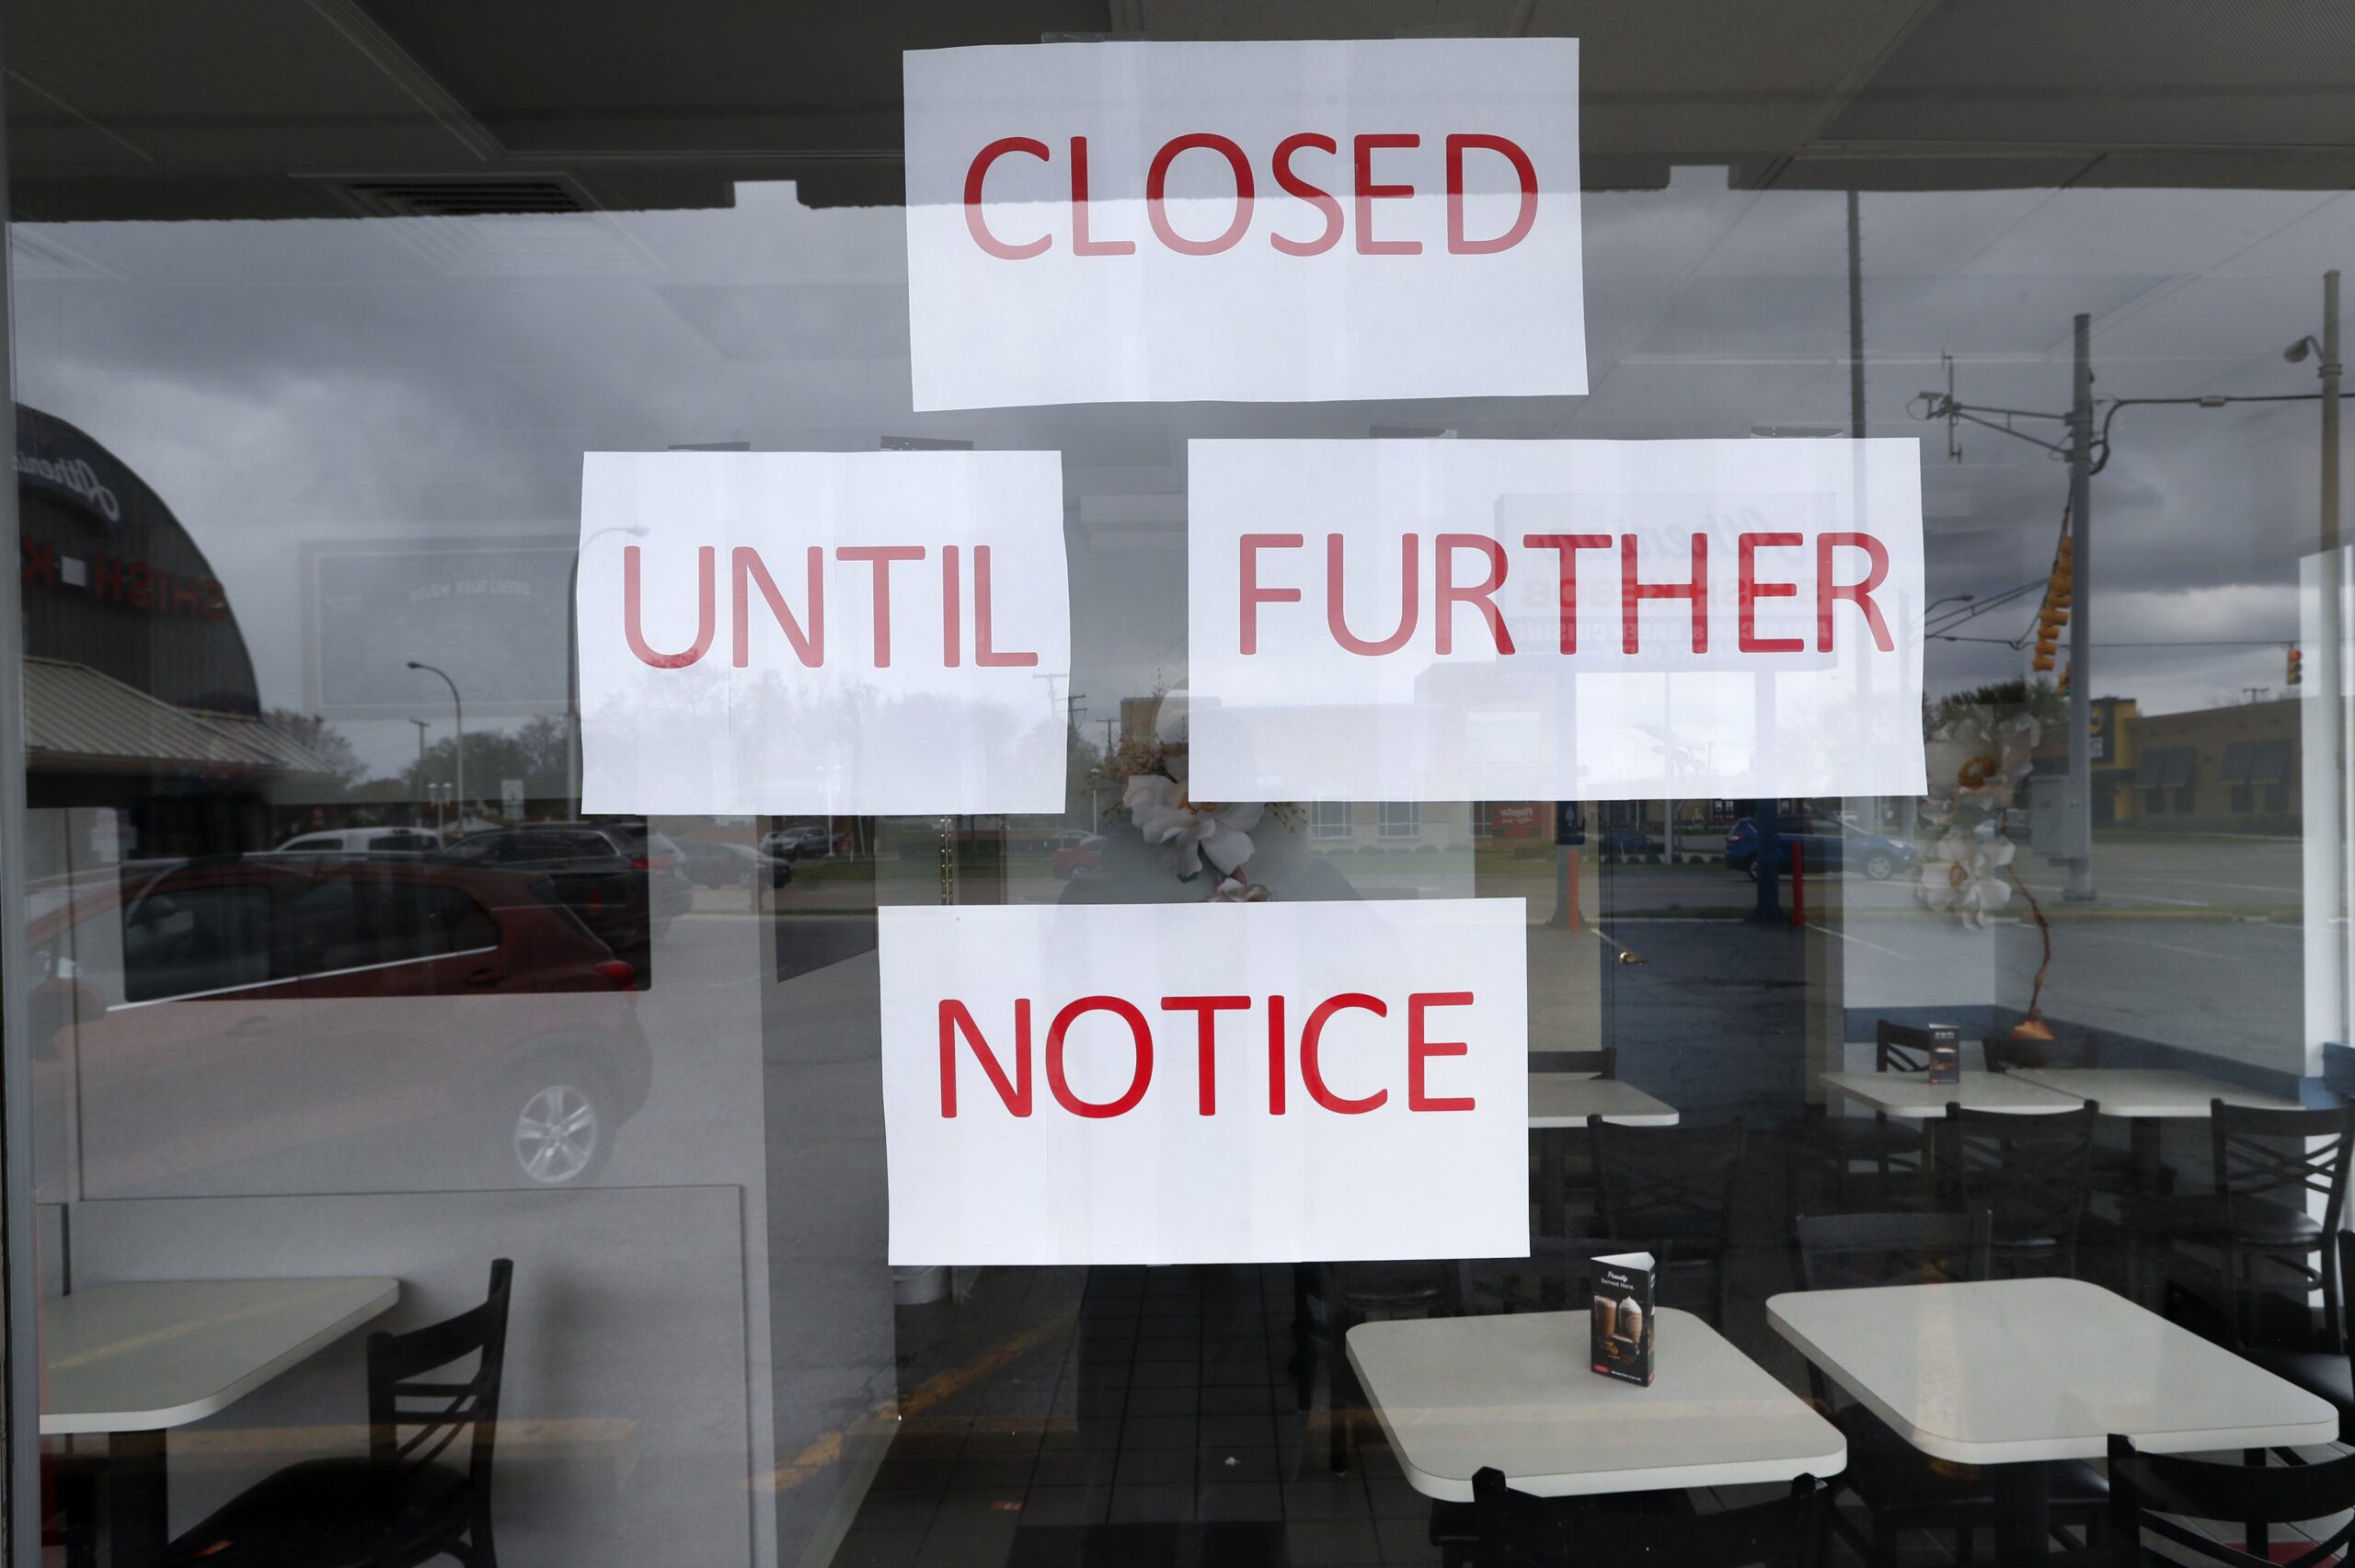 'Closed Until Further Notice' sign at restaurant